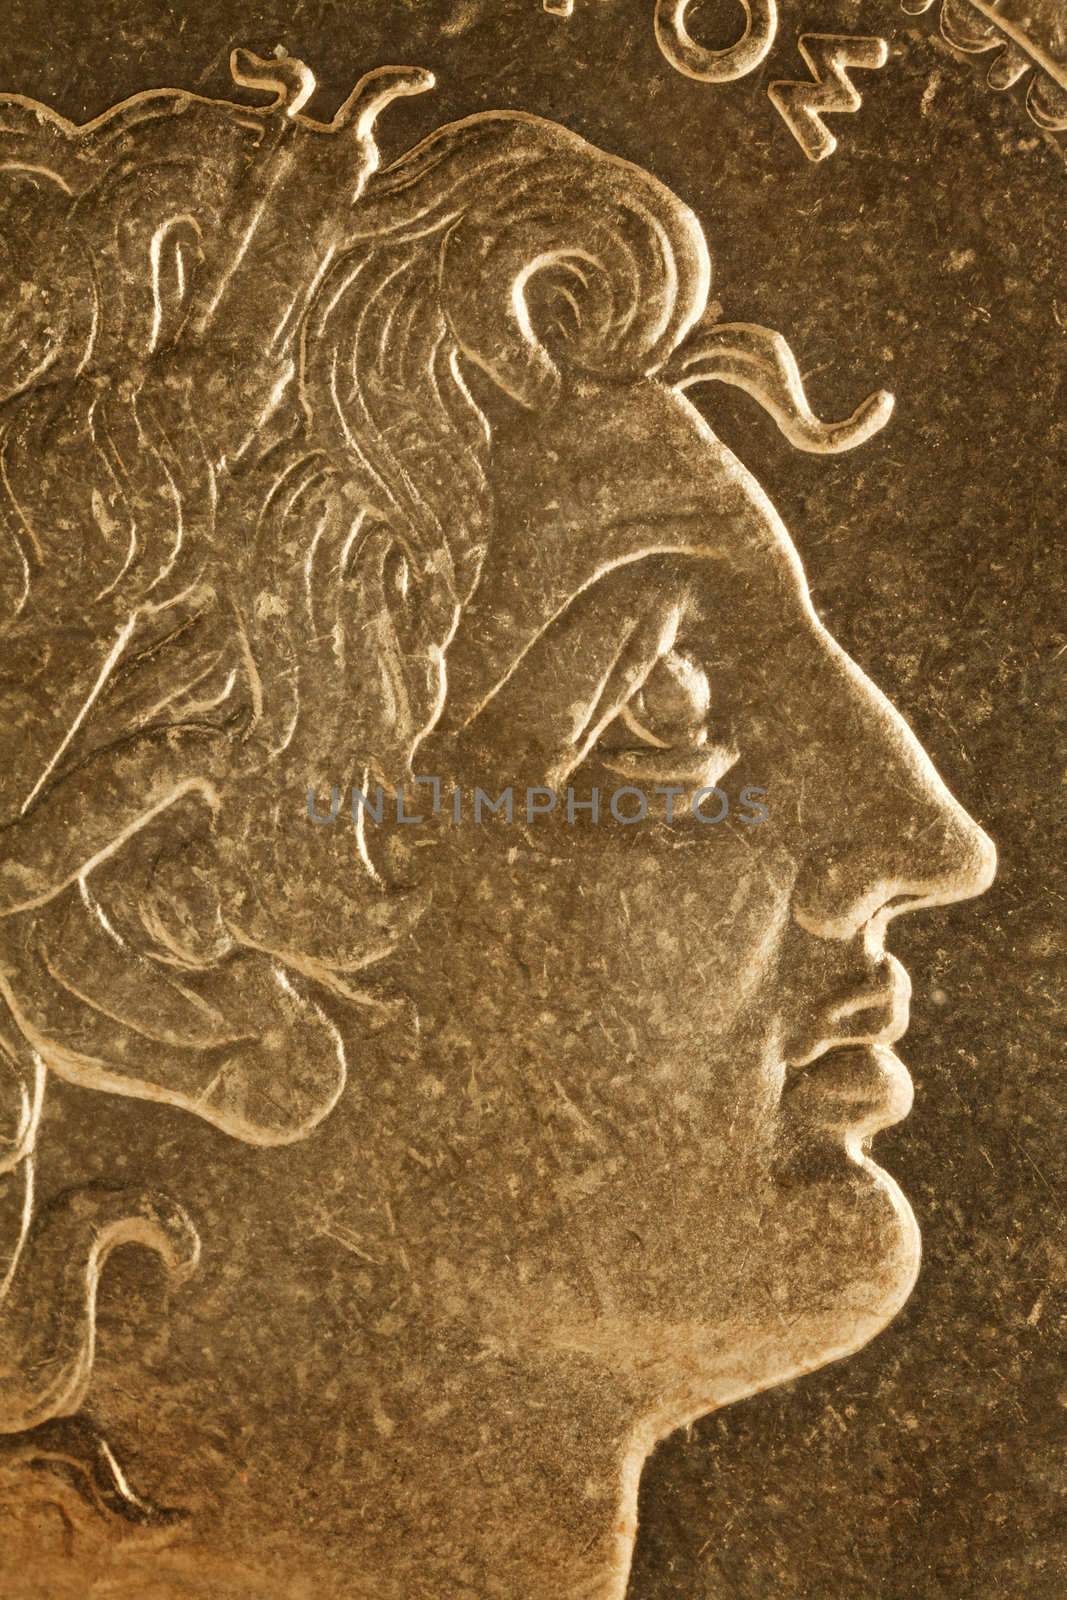 Alexander the Great profile portrait, Greek king of Macedon  - magnified detail from old scratched coin